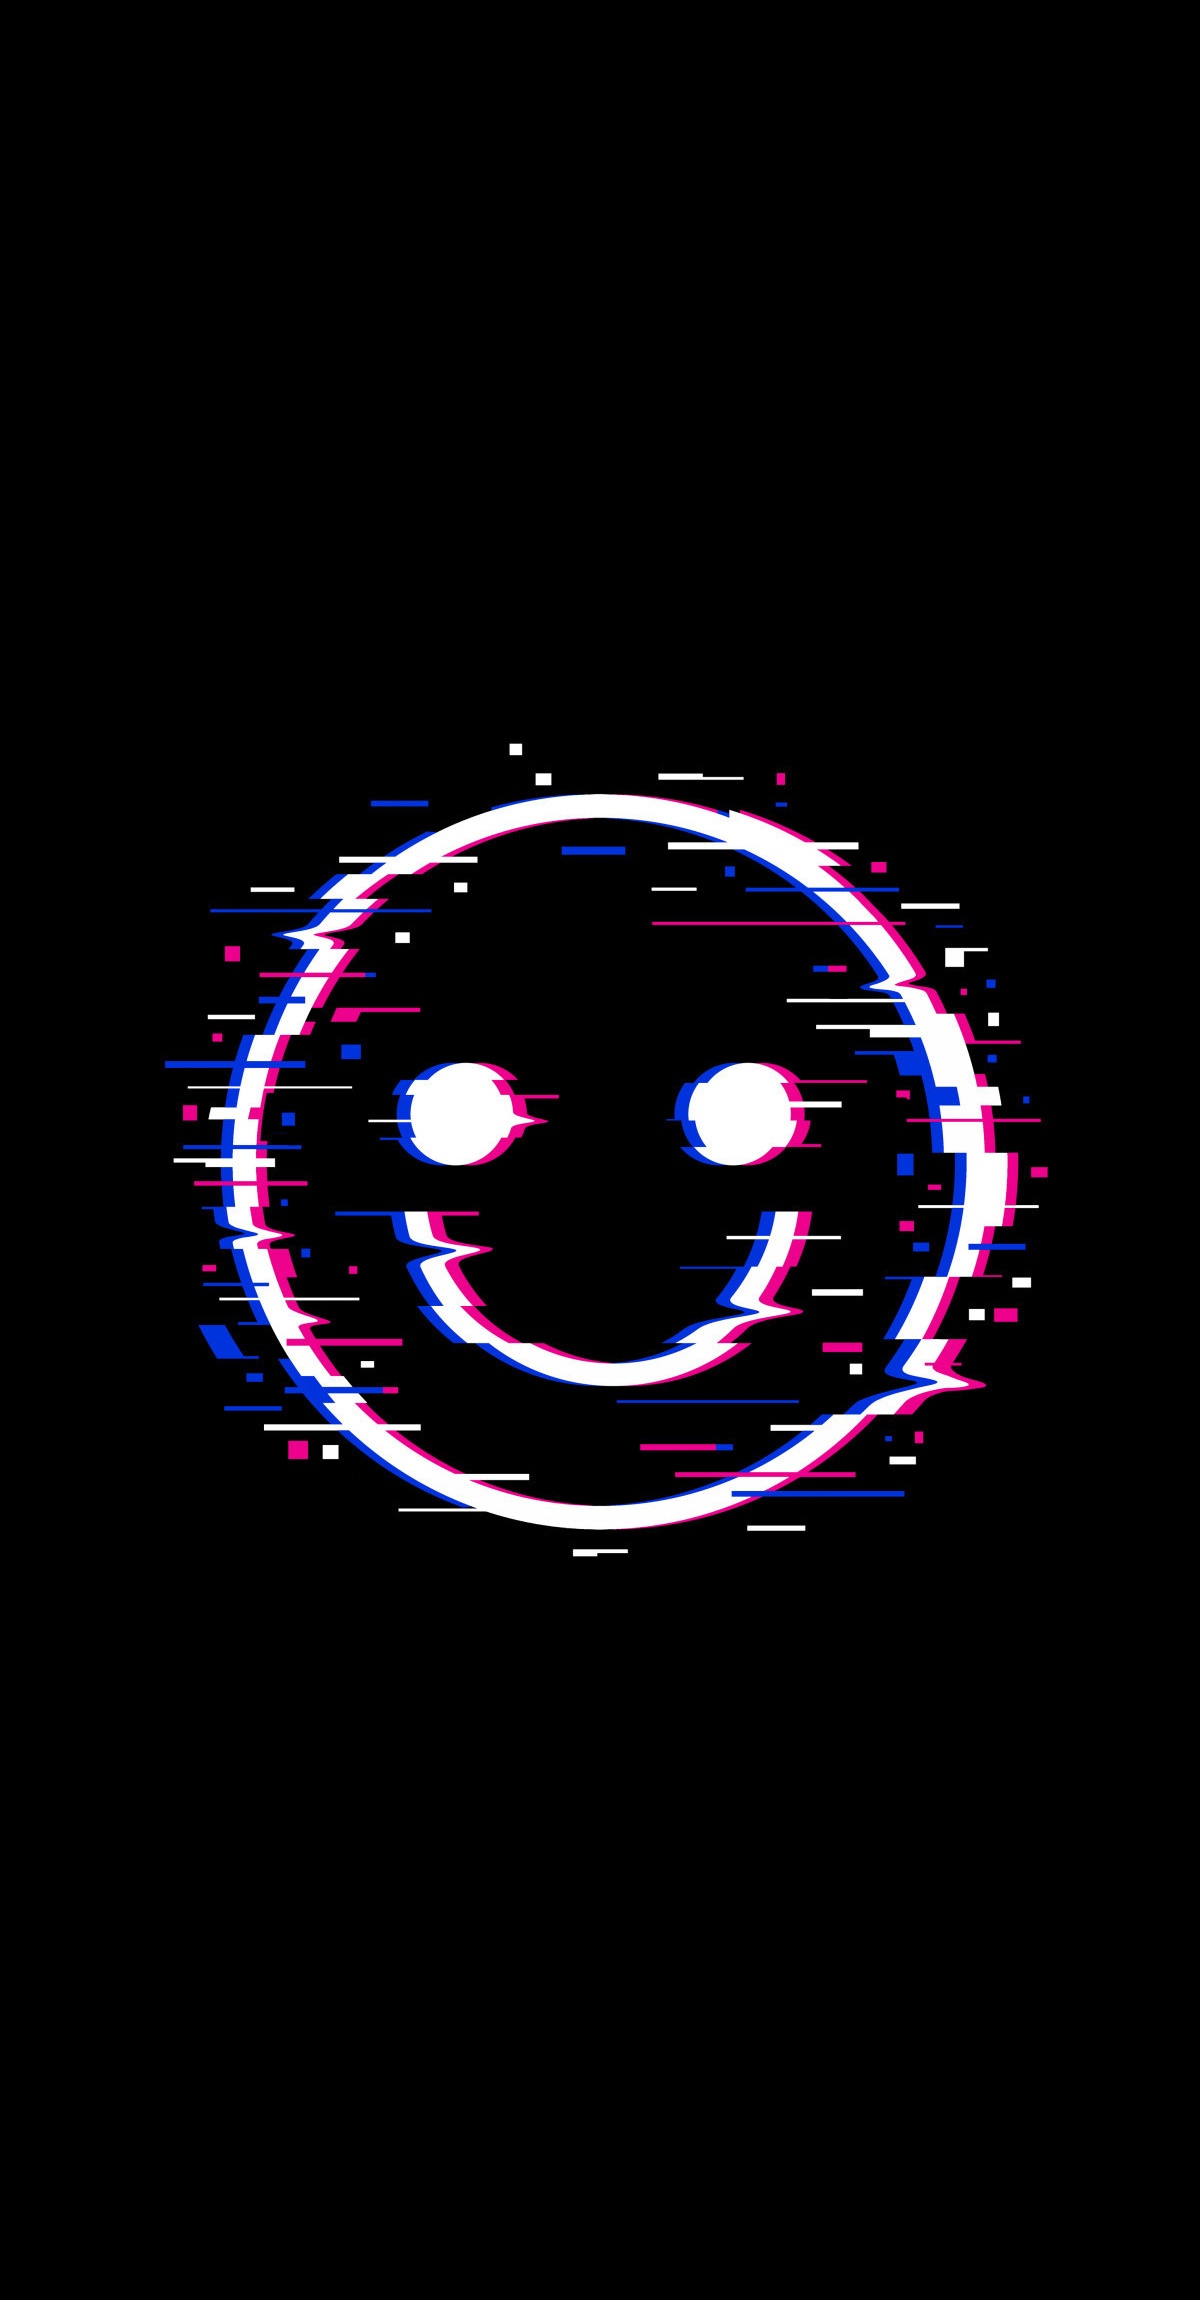 A black and white image of an animated smiley face - Smile